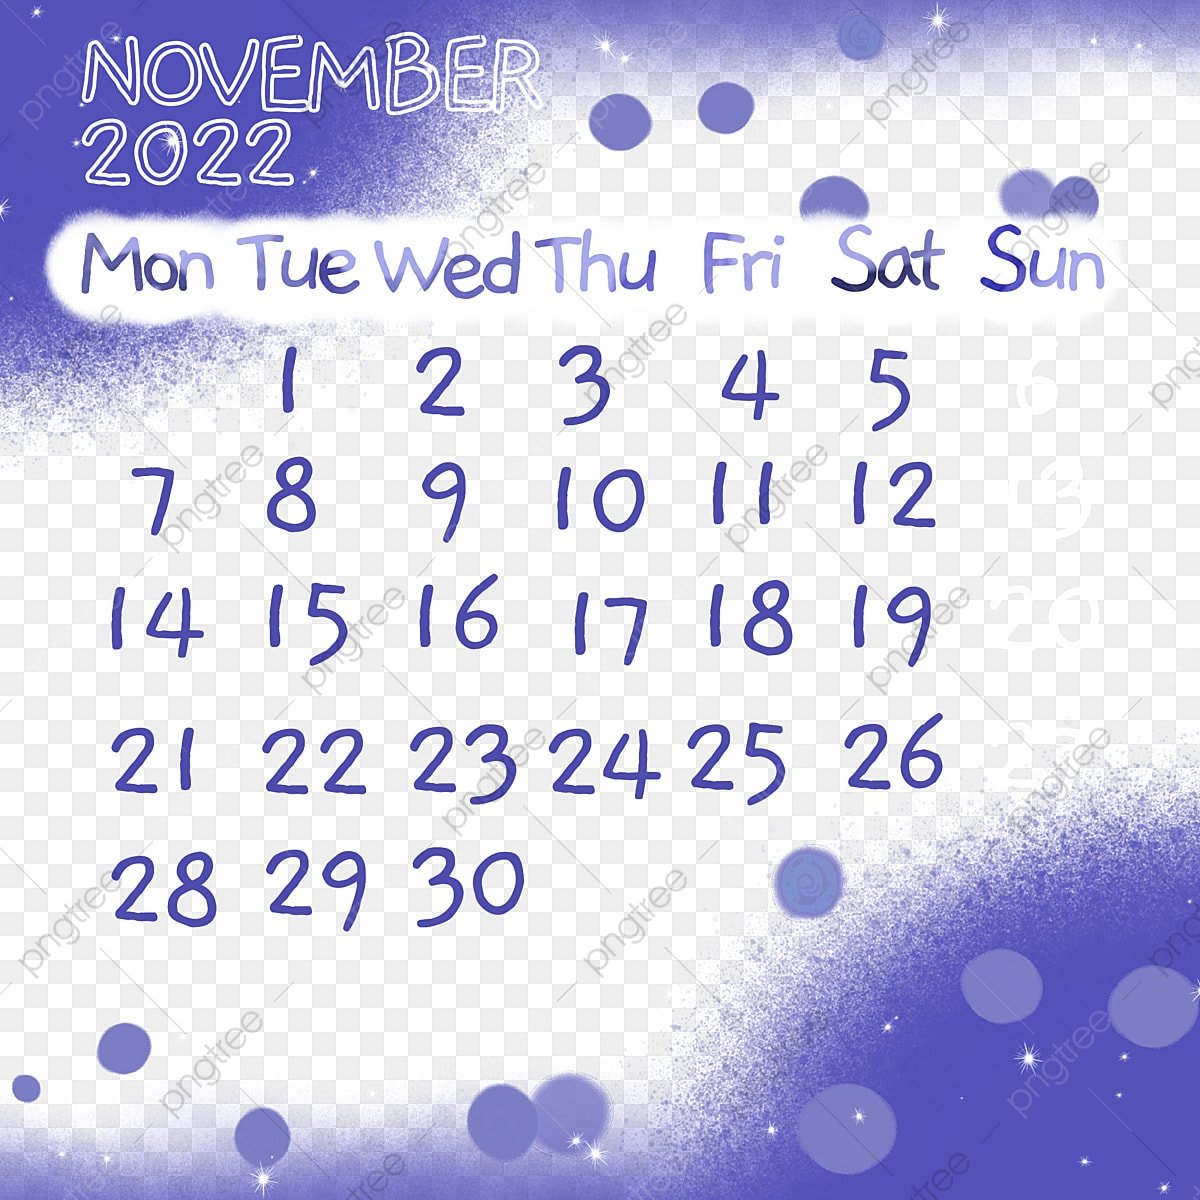 November 2022 Monthly Calendar In Very Peri Color Trend Design, November 2022, Calendar 2022, Monthly Calendar PNG Transparent Clipart Image and PSD File for Free Download